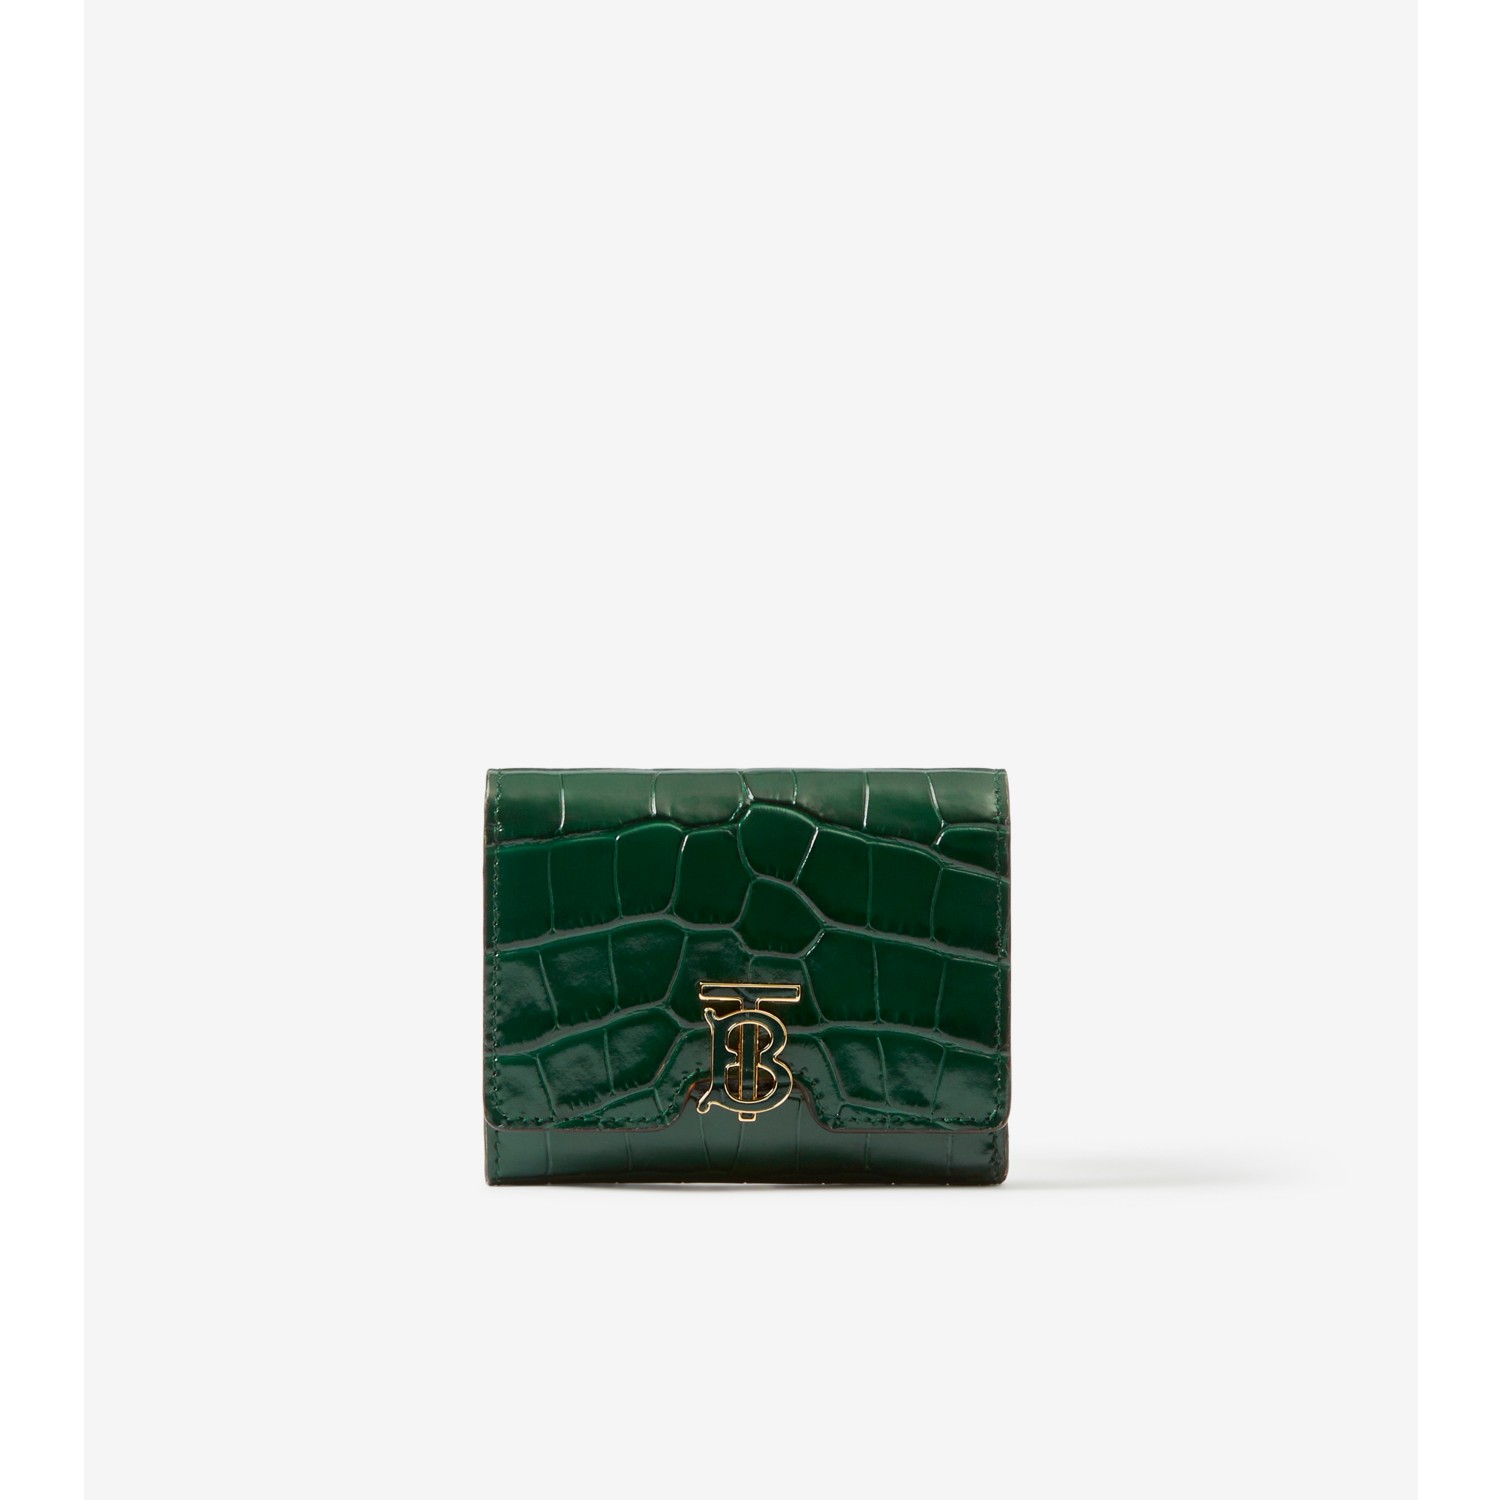 Burberry TB Compact Wallet